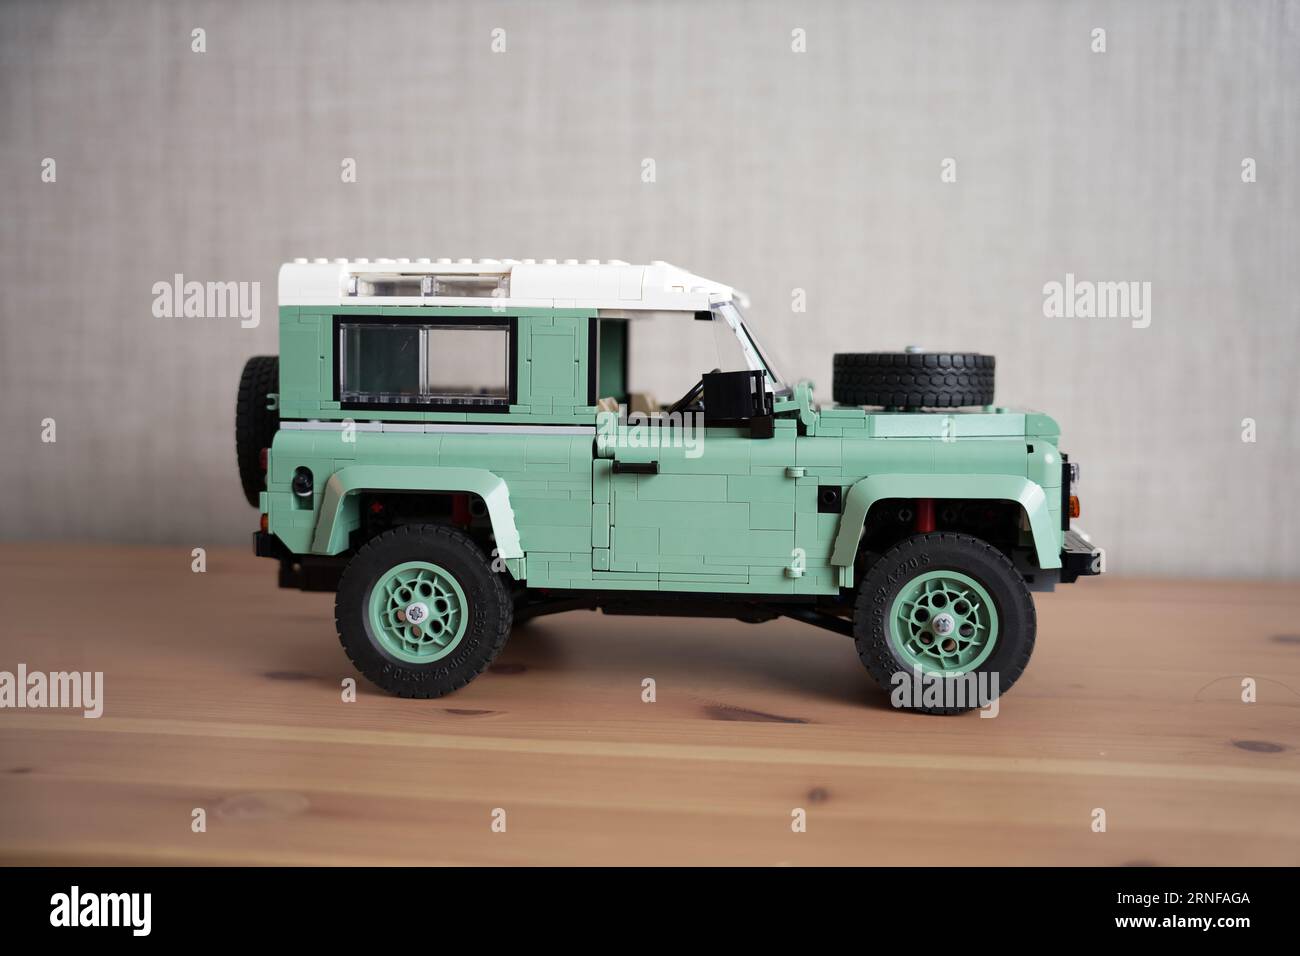 Lego Defender,Land Rover Classic Defender 90. Green car lego with details. Stock Photo